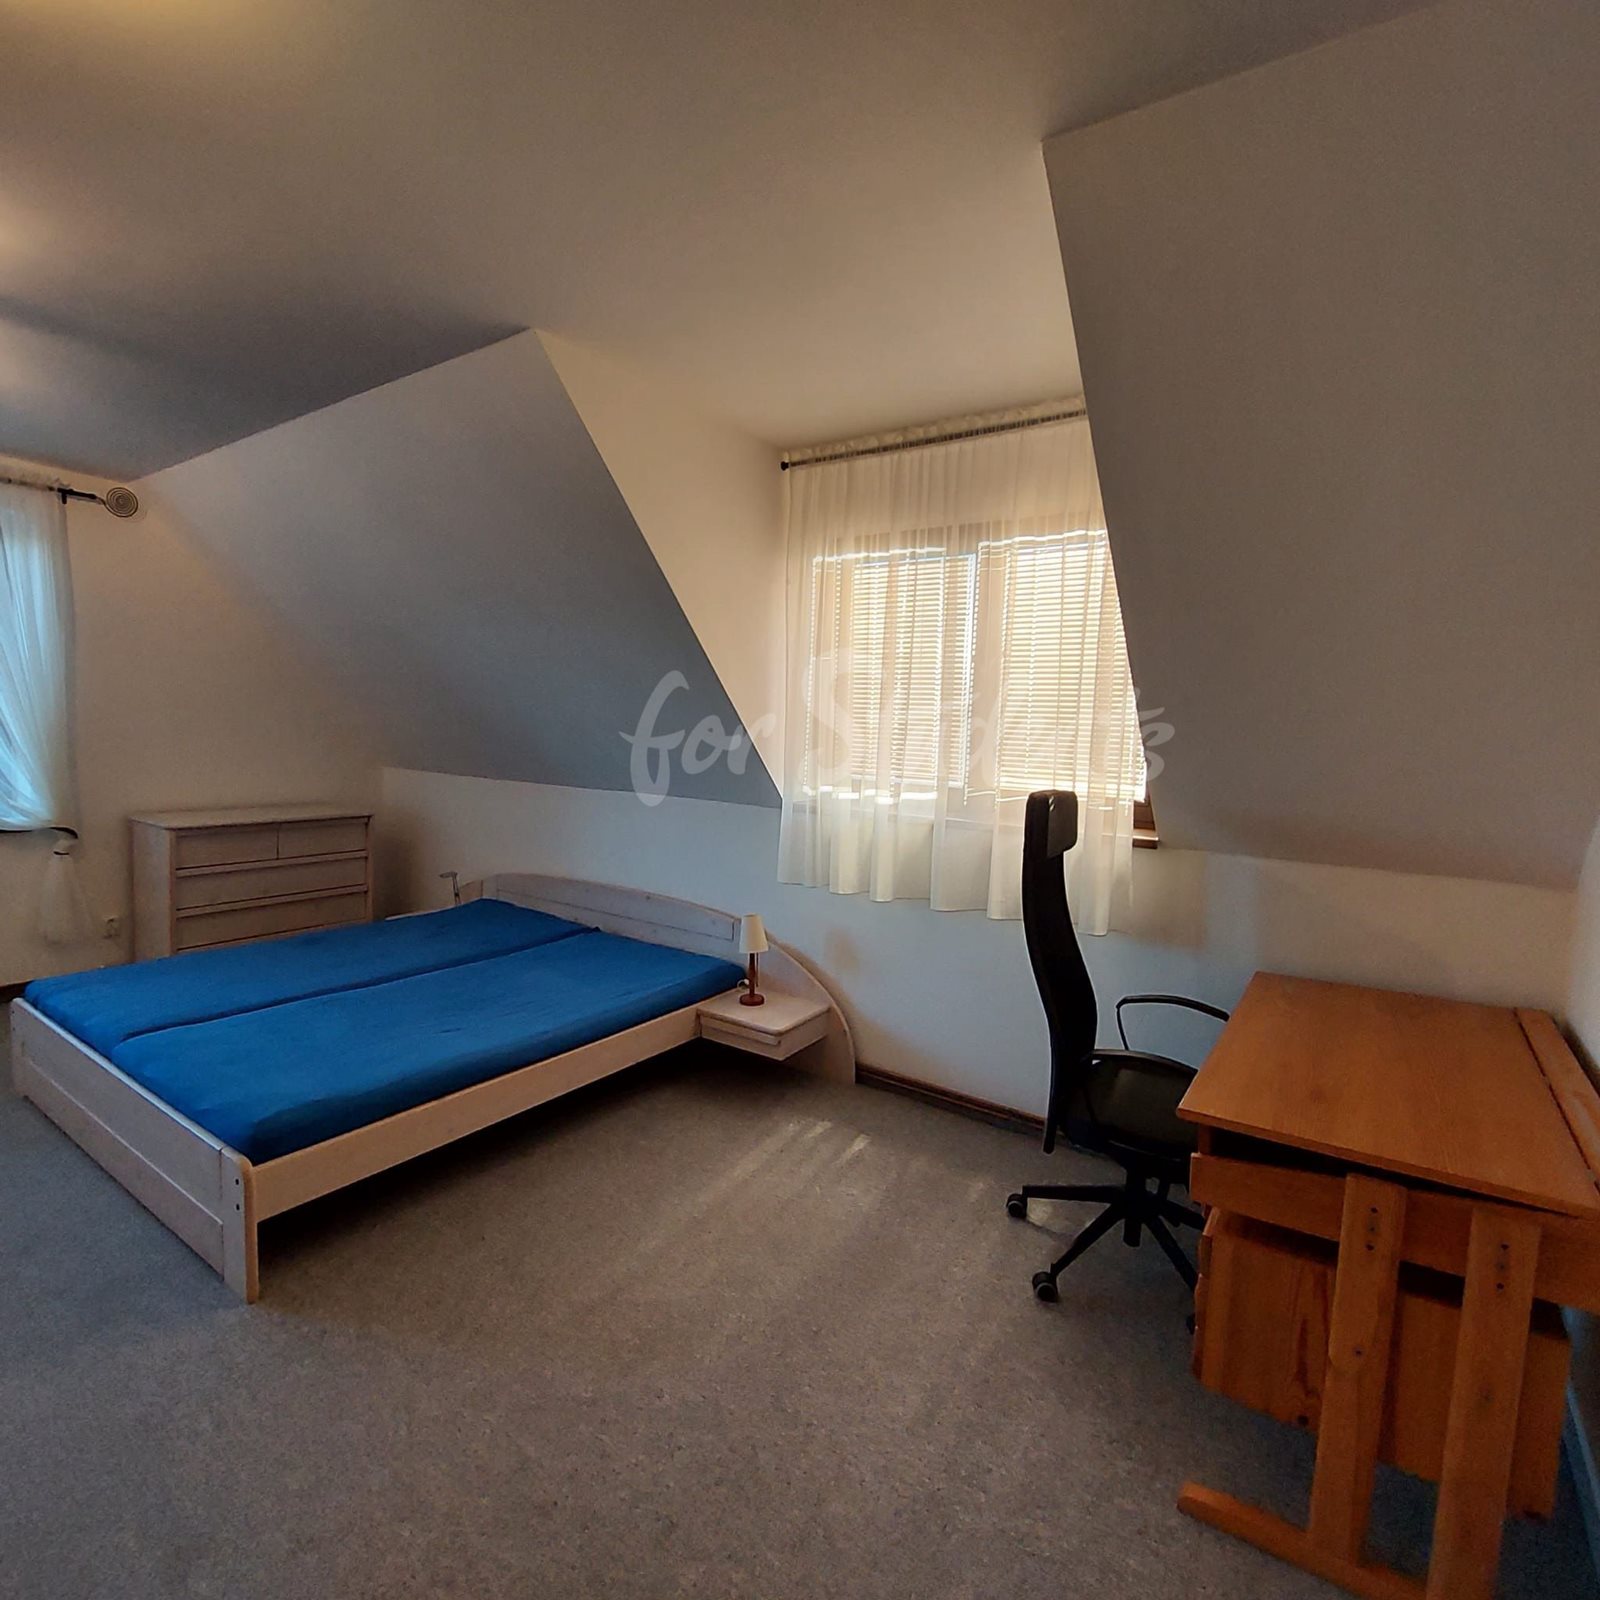 Spacious two bedroom apartment in a family house, Prague